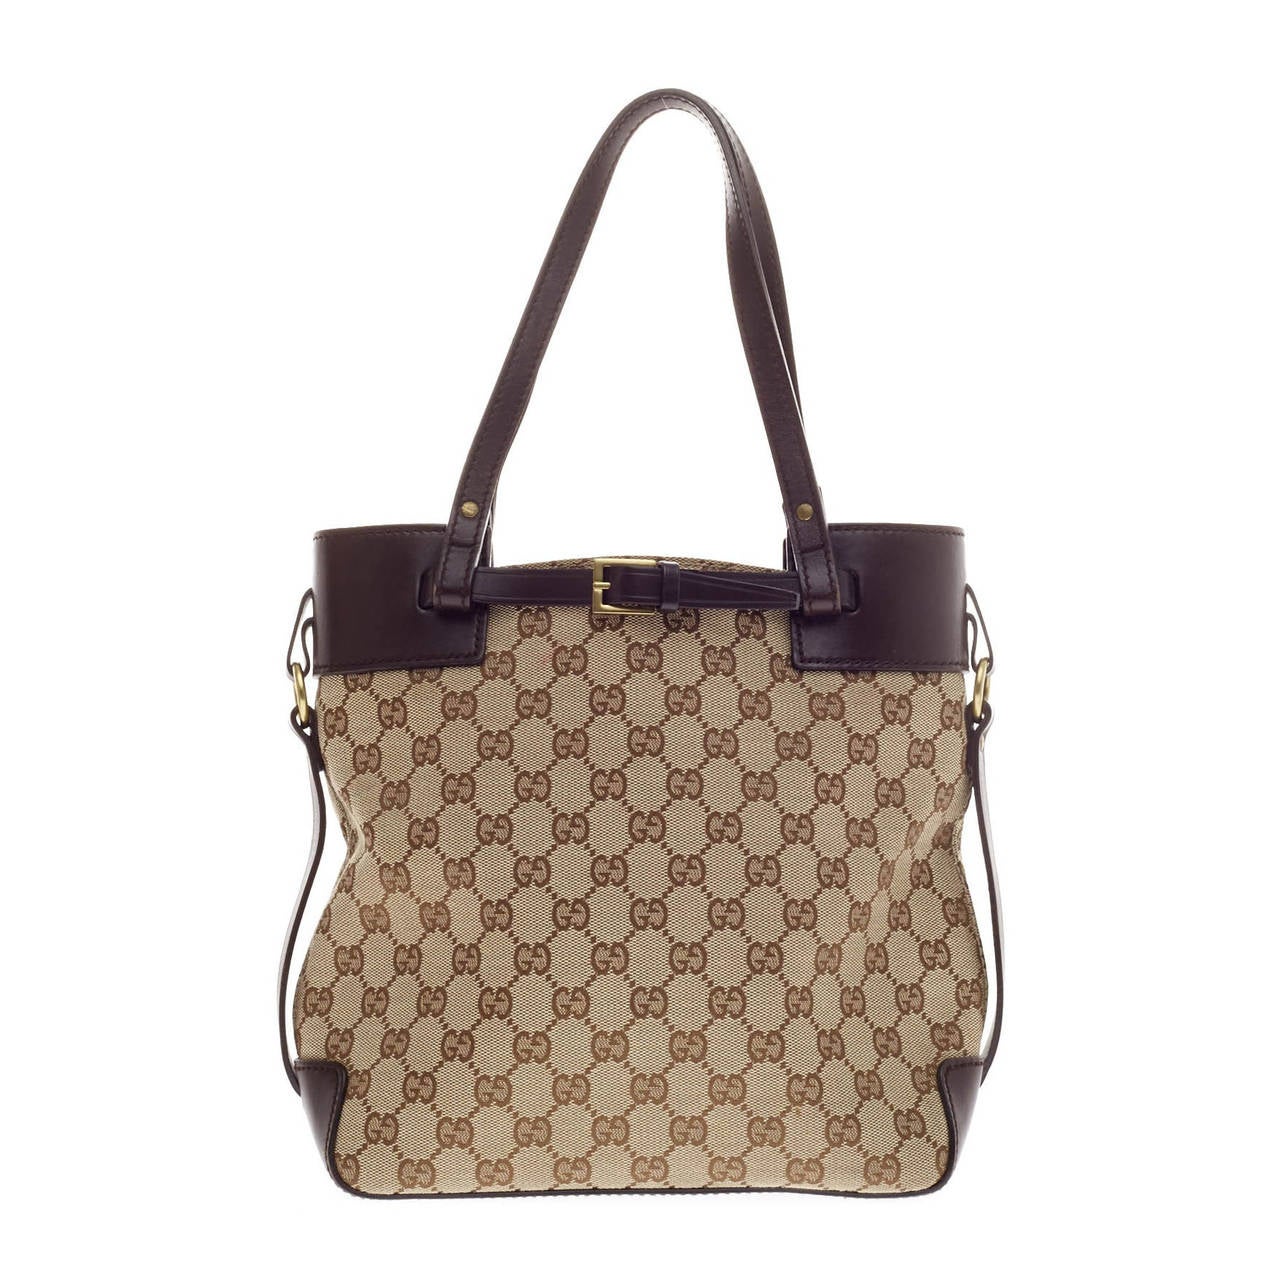 Gucci Buckle Tote GG Canvas with Leather Trim